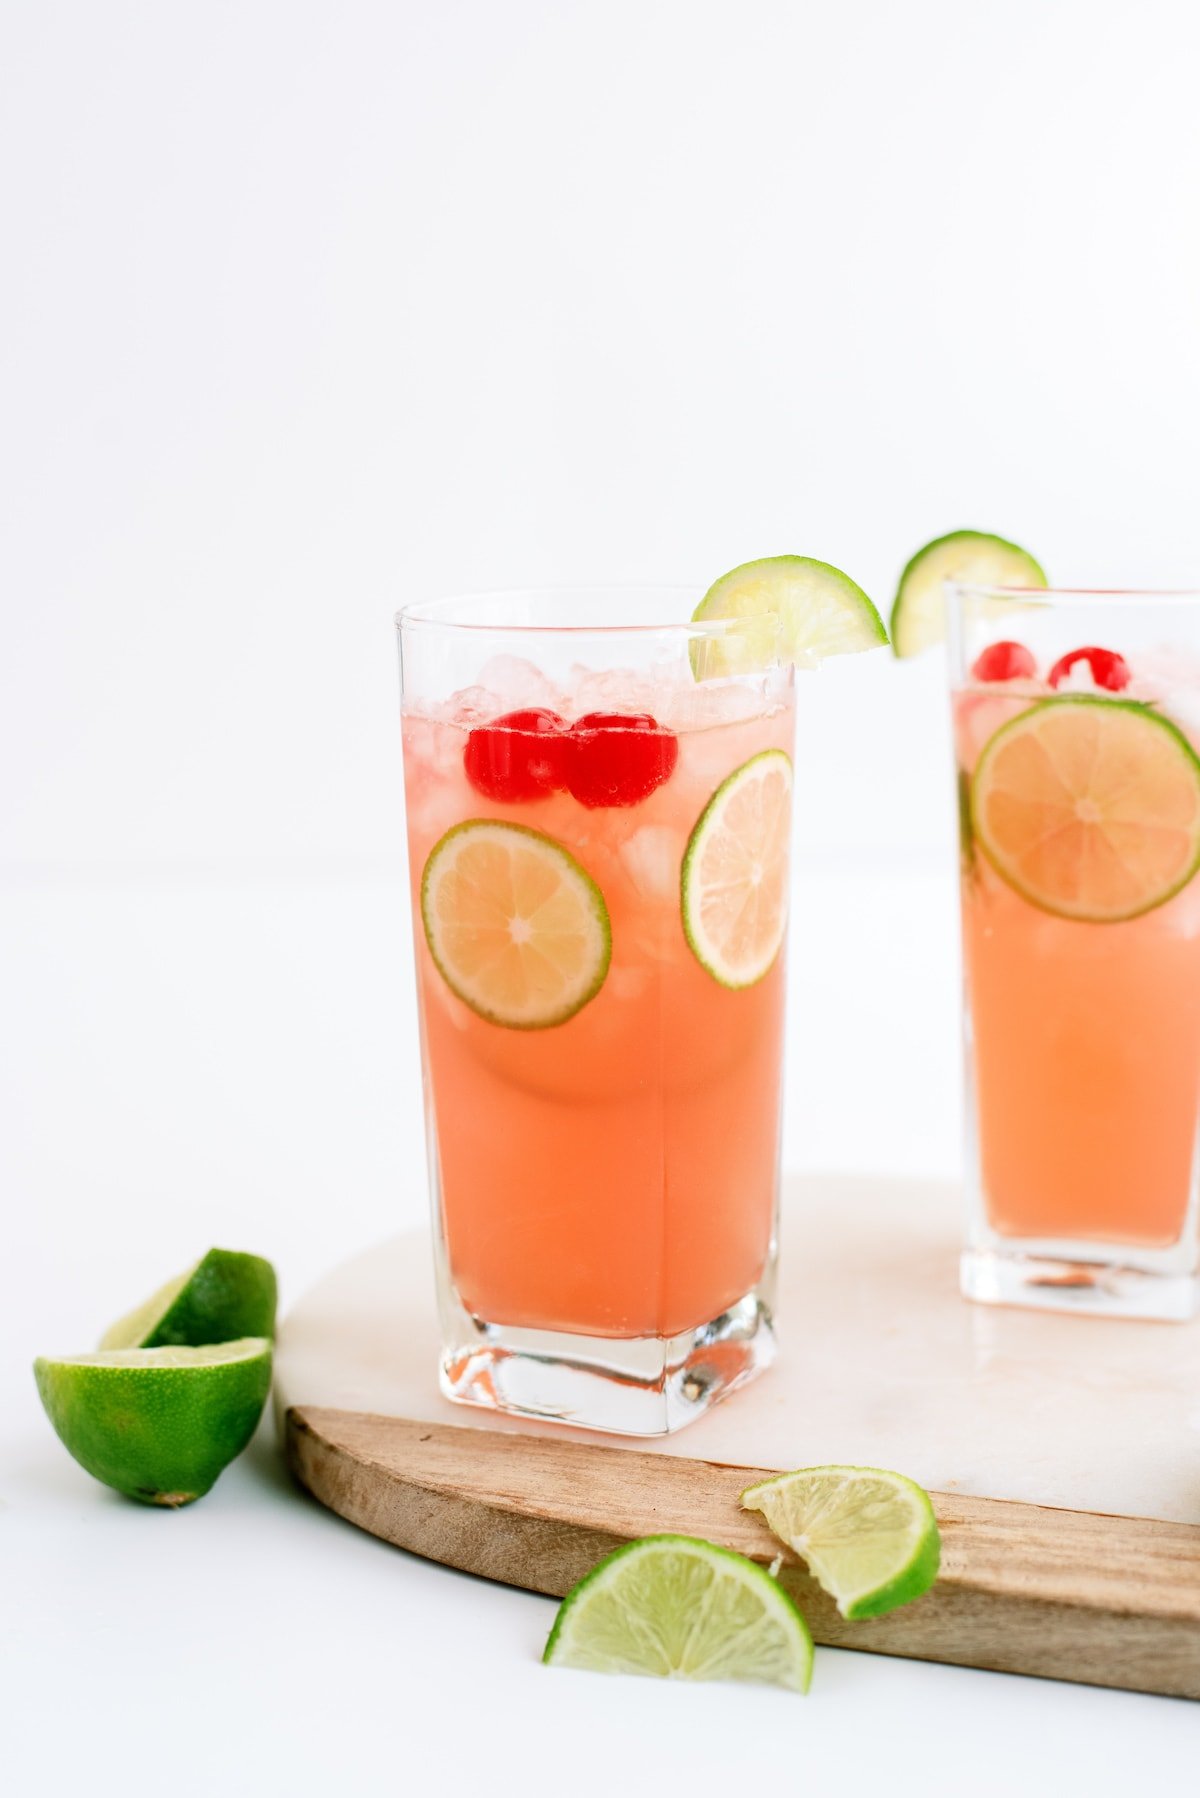 cherry limeade in a glass with lemon wedges